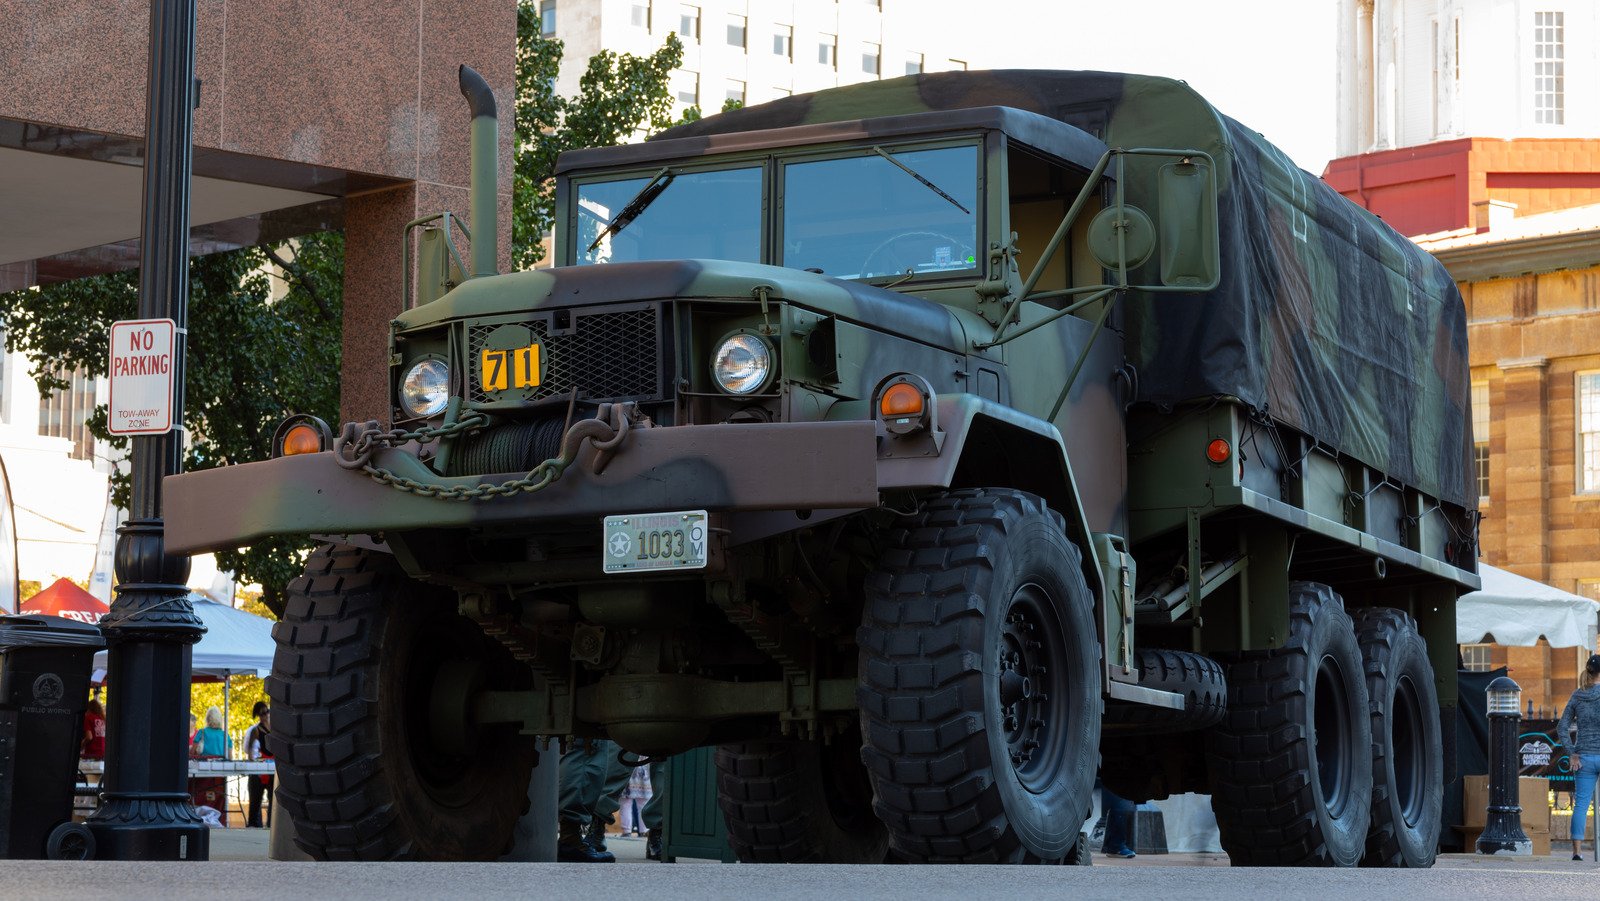 The M35A2 Is The 6.75-Ton Military Vehicle You Can Own